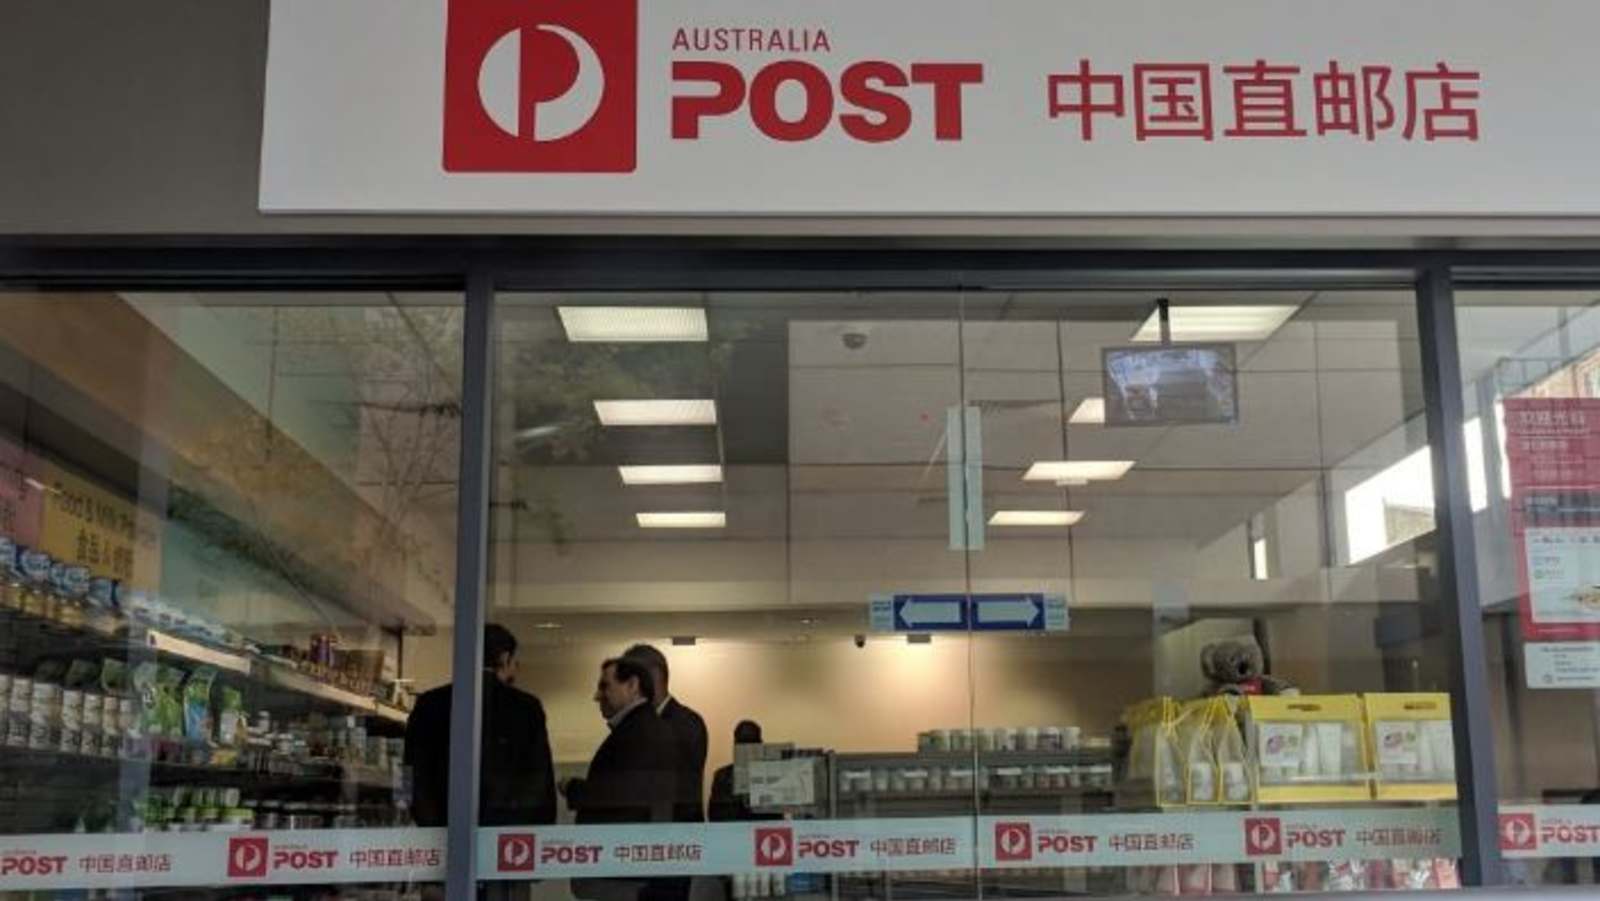 "This is not a post office": Australia Post's new concept store in Chatswood.